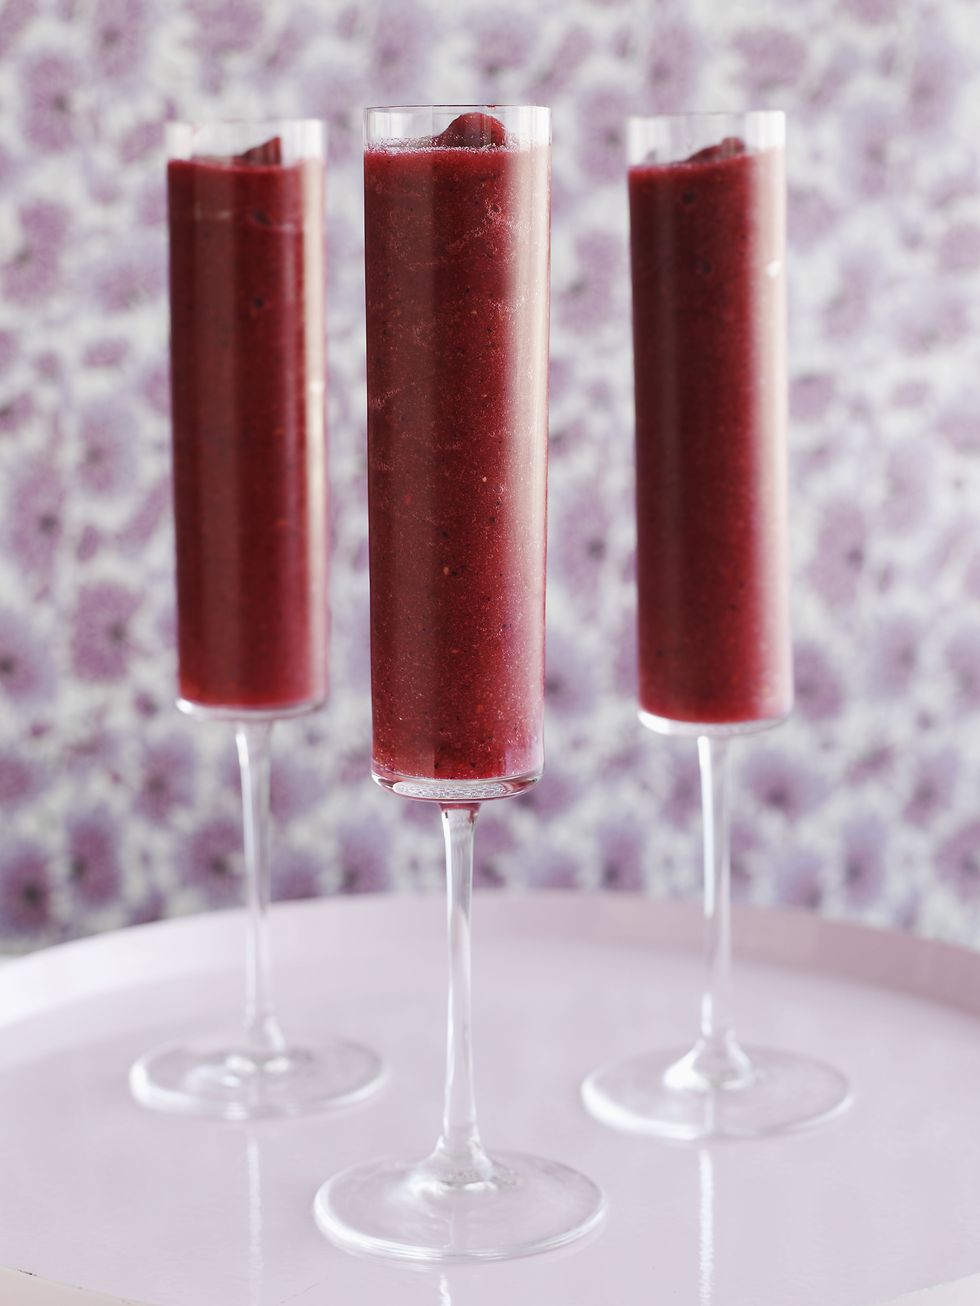 <p>A <a href="http://www.foodnetwork.com/recipes/paula-deen/mixed-berry-bellinis-recipe.html">better-than-popsicles recipe.</a></p><p><strong>Ingredients: </strong></p><p>1 (12-oz.) Package Frozen Mixed Berries, thawed</p><p>1/4 cup Sugar</p><p>1 (750 ml) Bottle Sparkling Wine or Prosecco<br><br><strong>Directions: </strong></p><p>In the container of an electric blender, combine berries and sugar; process until smooth. Strain mixture, if desired. Pour fruit mixture into a serving pitcher; slowly add wine, stirring gently to combine.<br></p>